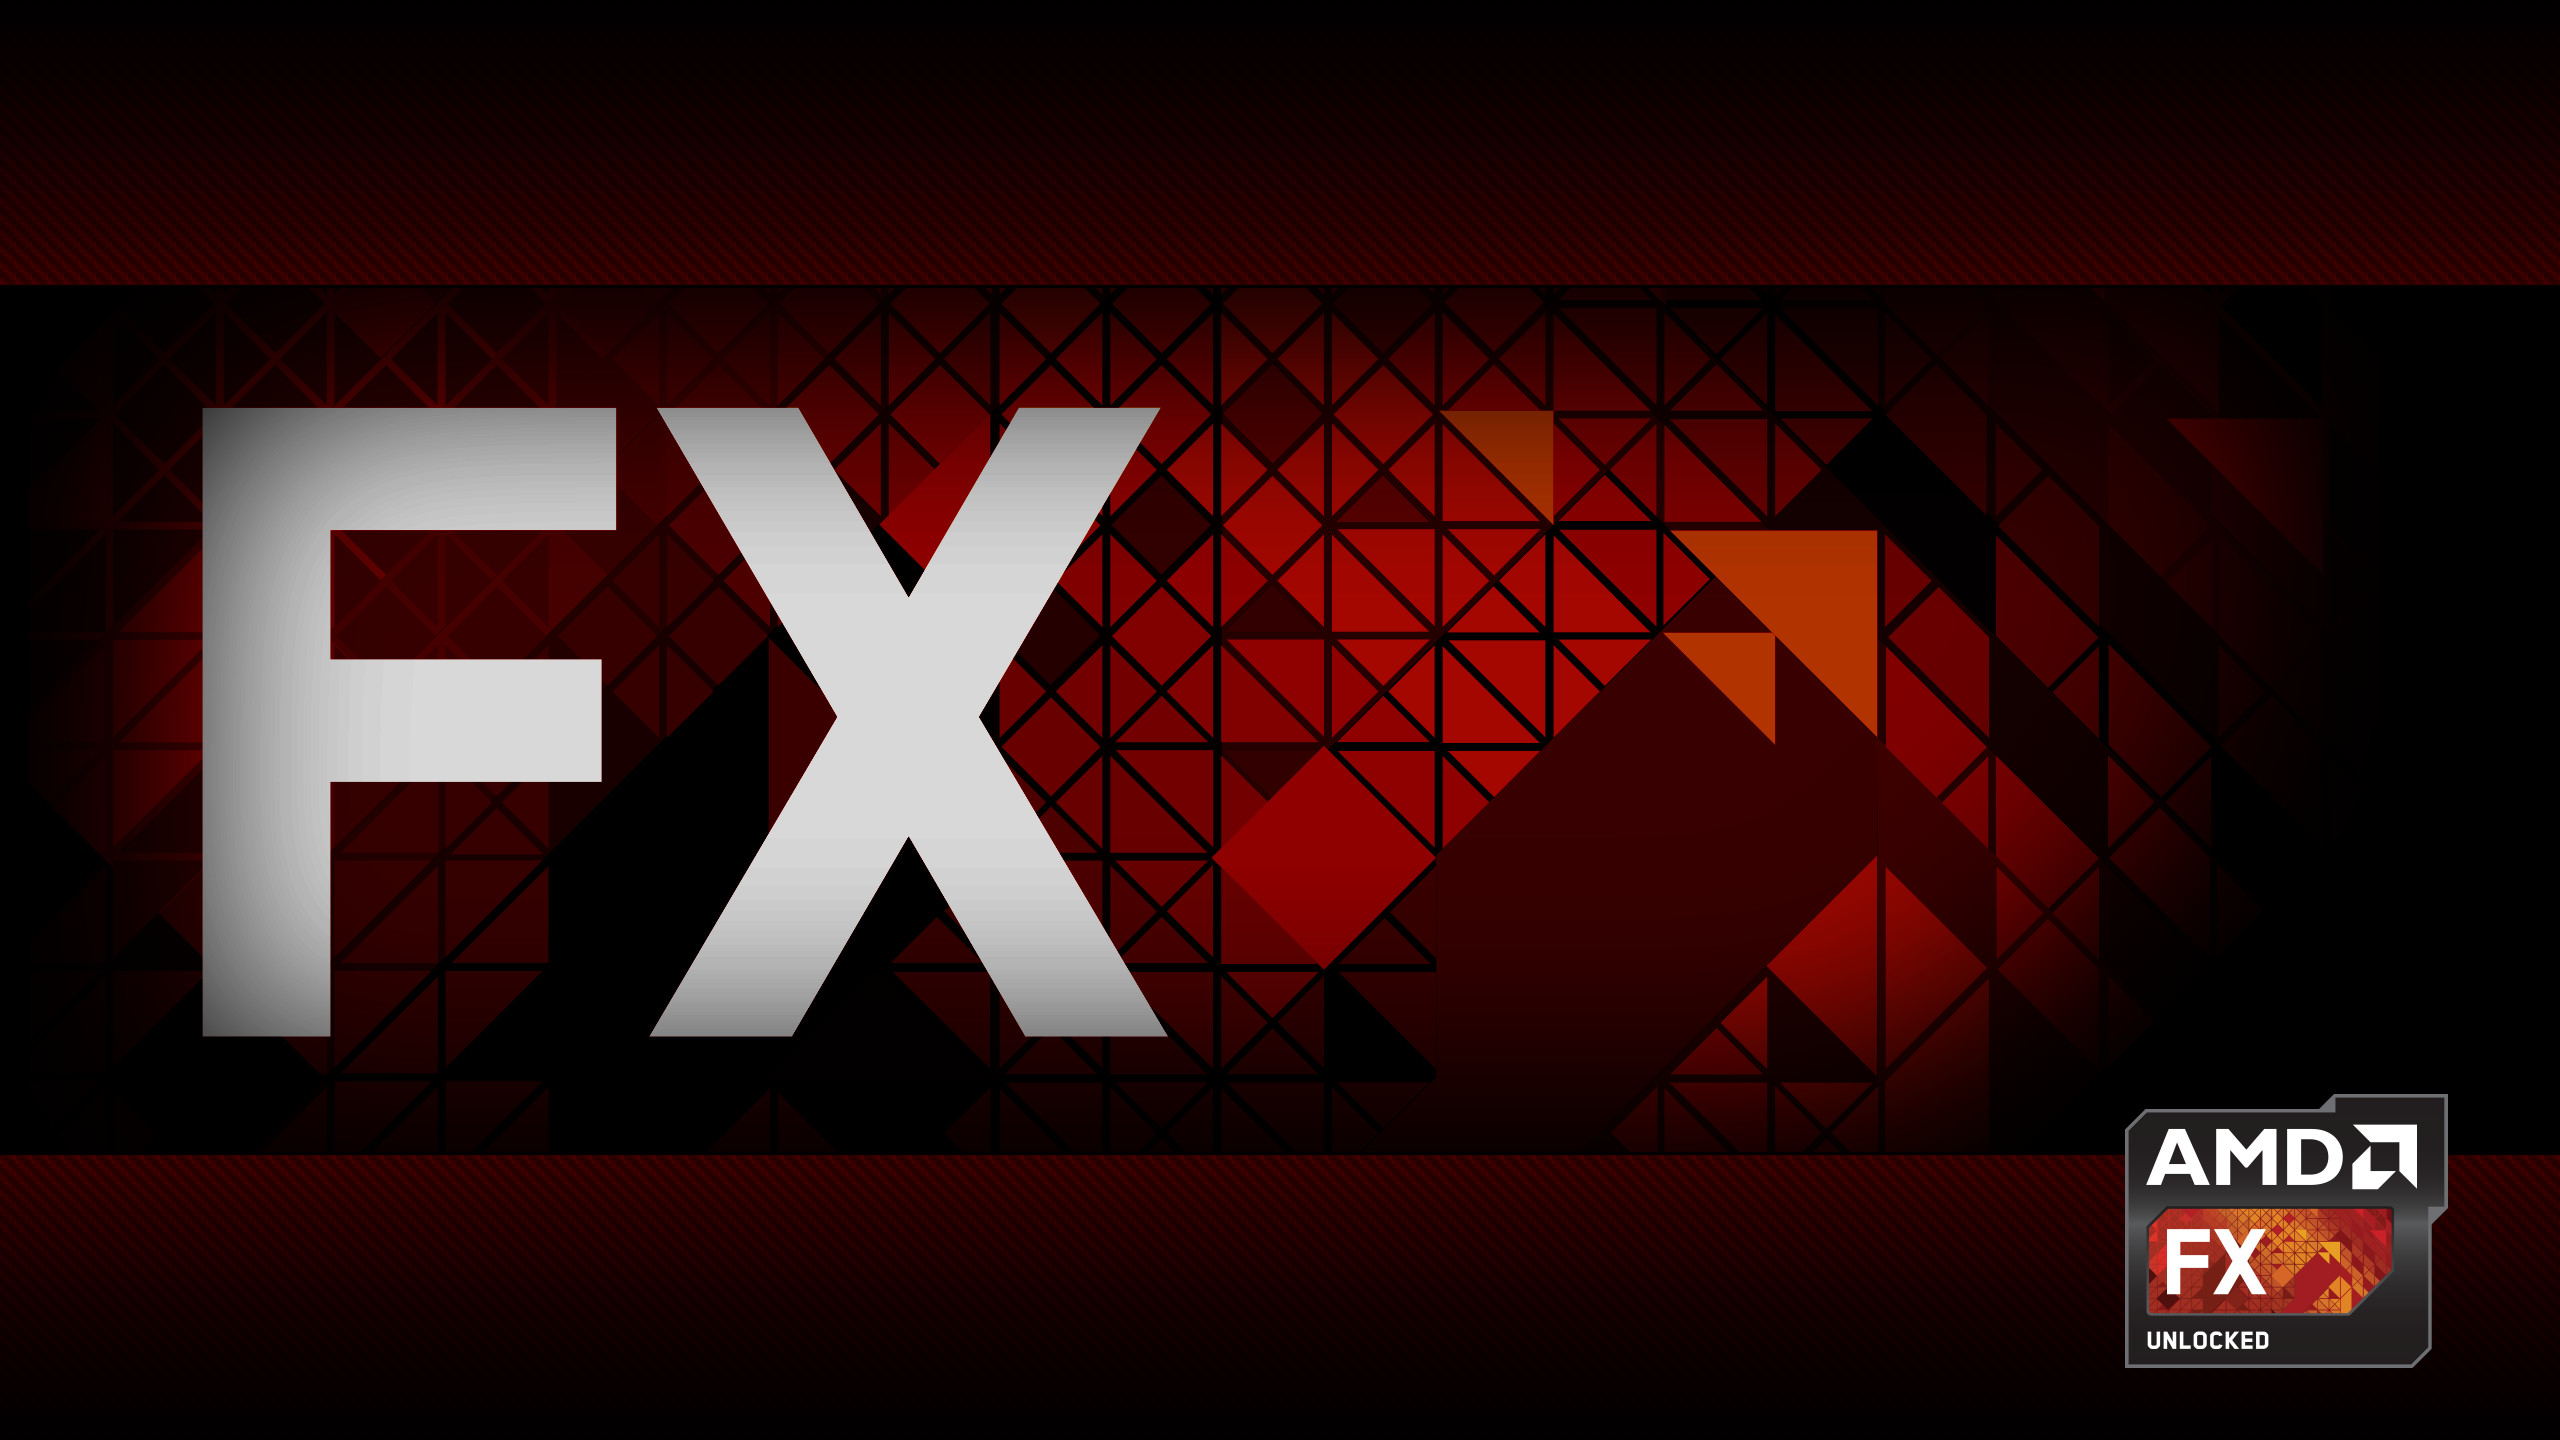 AMD Fx Wallpapers (74+ images)